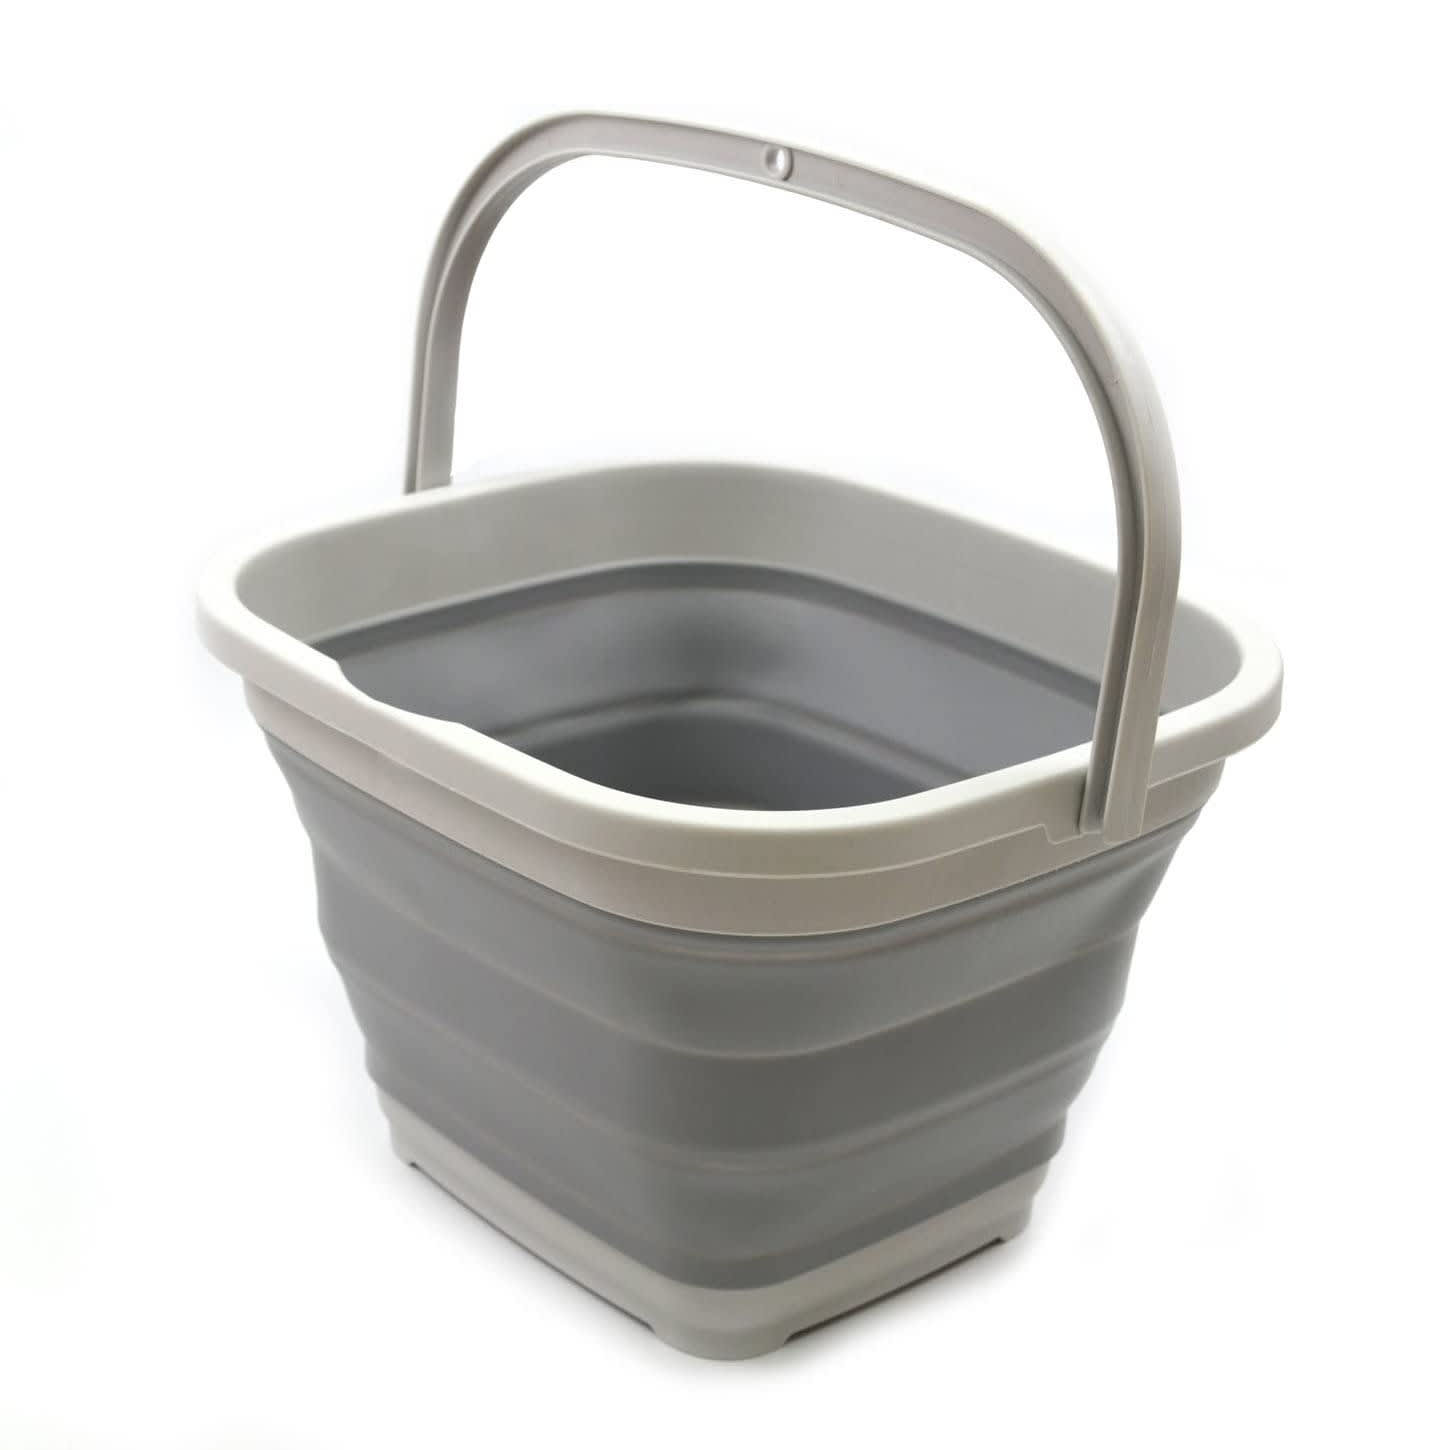 The Best Buckets for House Cleaning: 5 Important Features